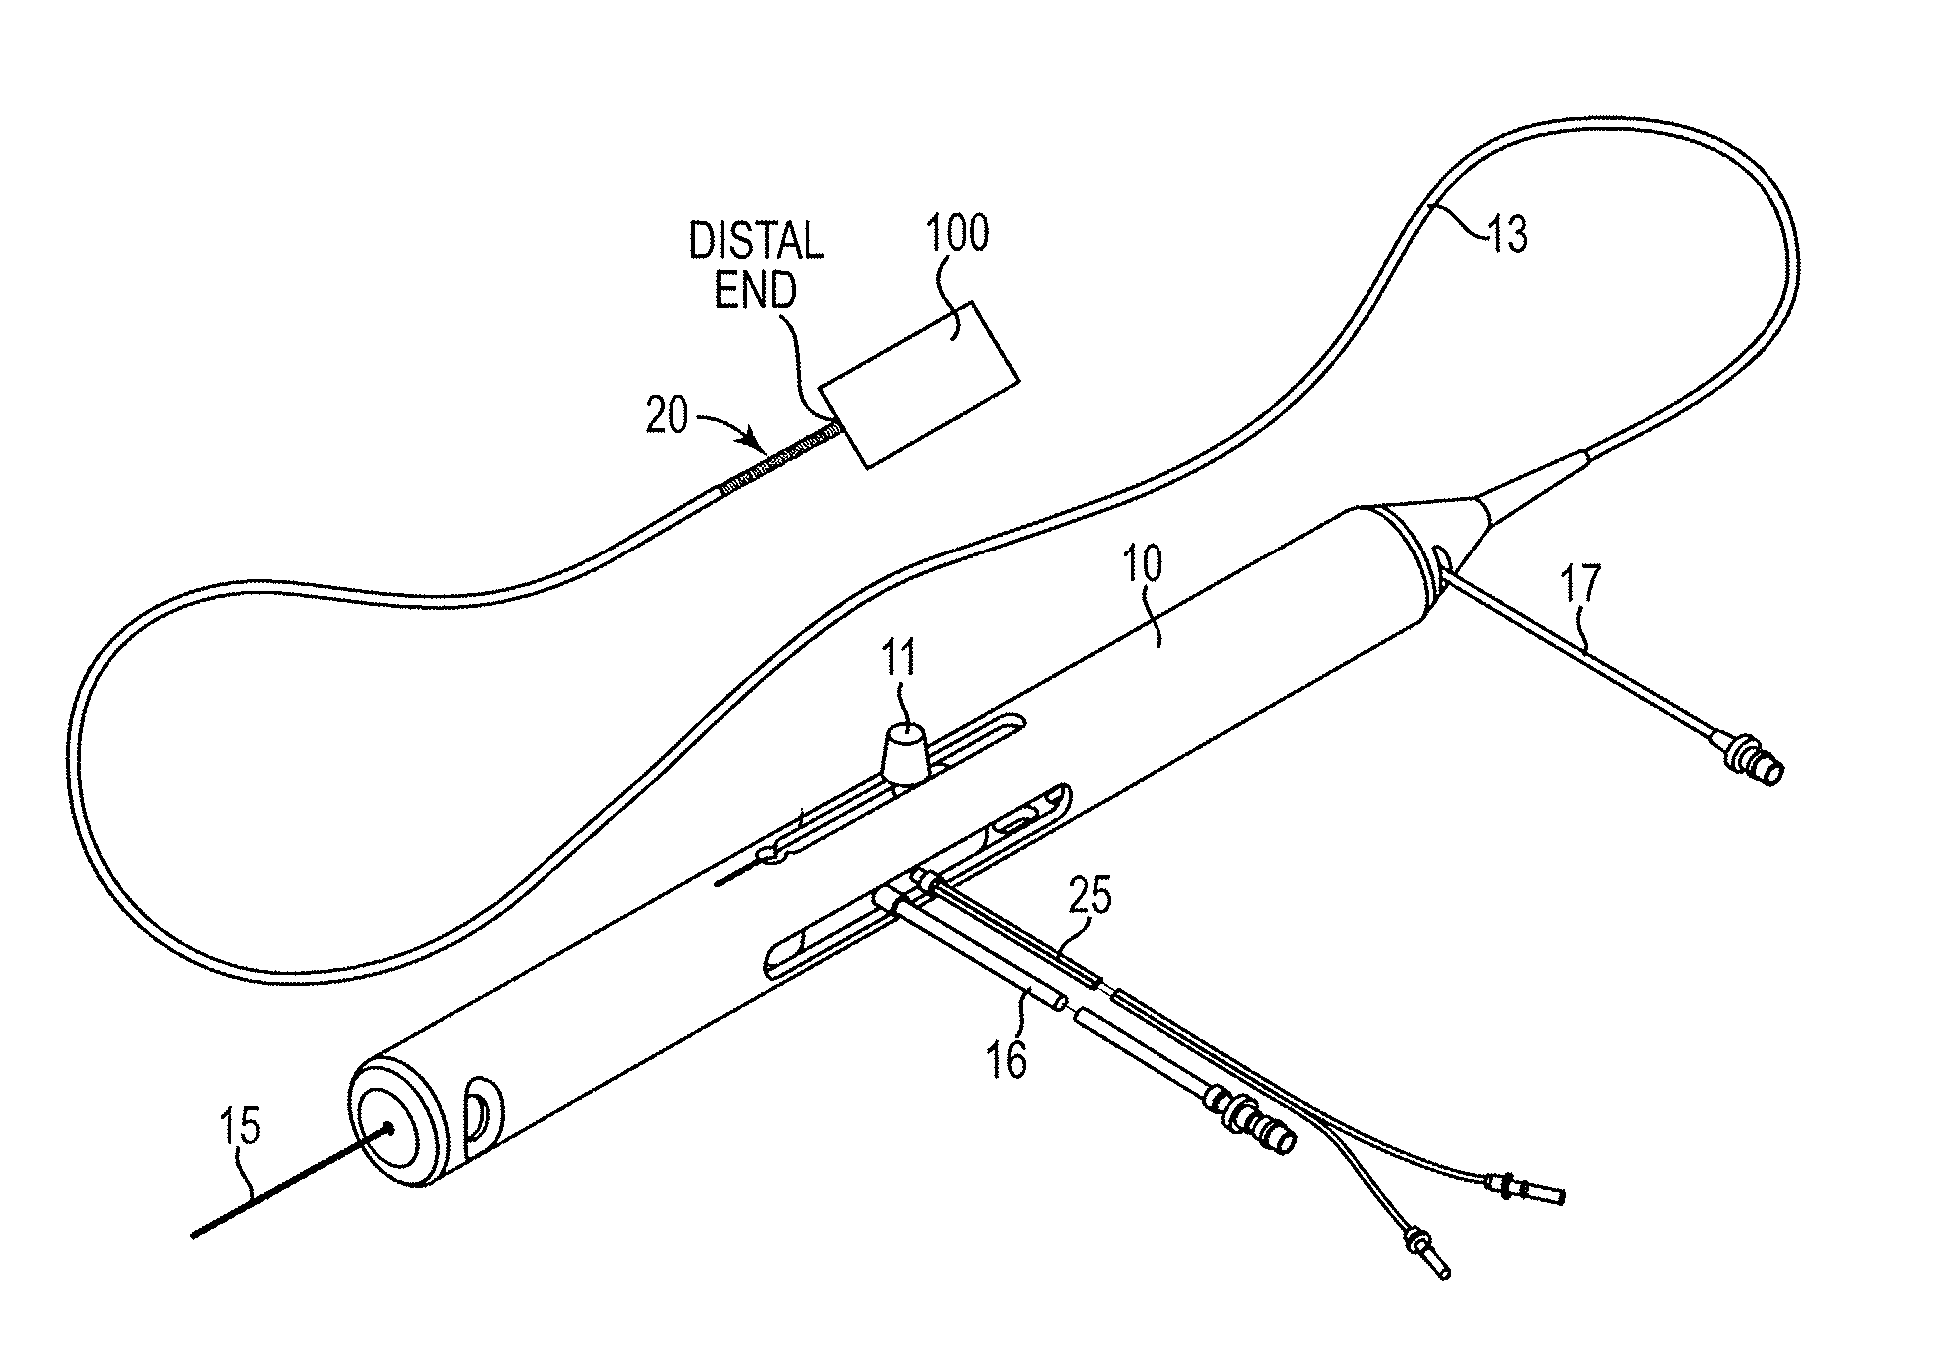 Devices, systems and methods for an oscillating crown drive for rotational atherectomy